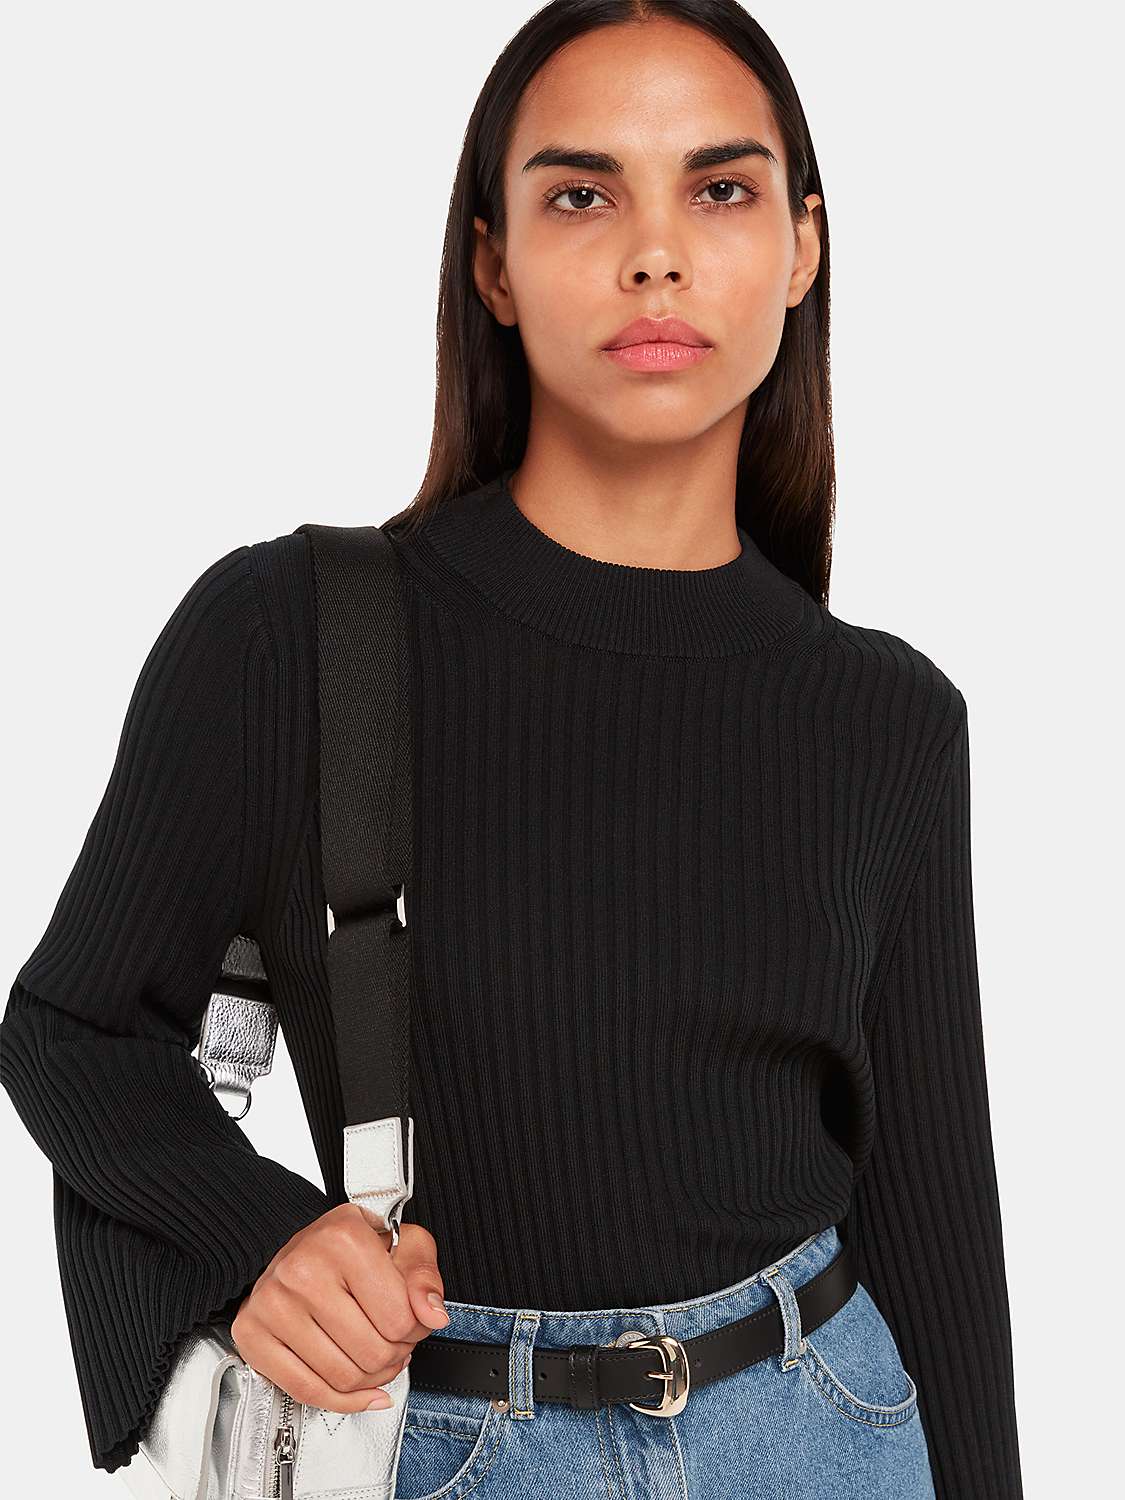 Buy Whistles Fluted Sleeve Knit Tunic Top, Black Online at johnlewis.com